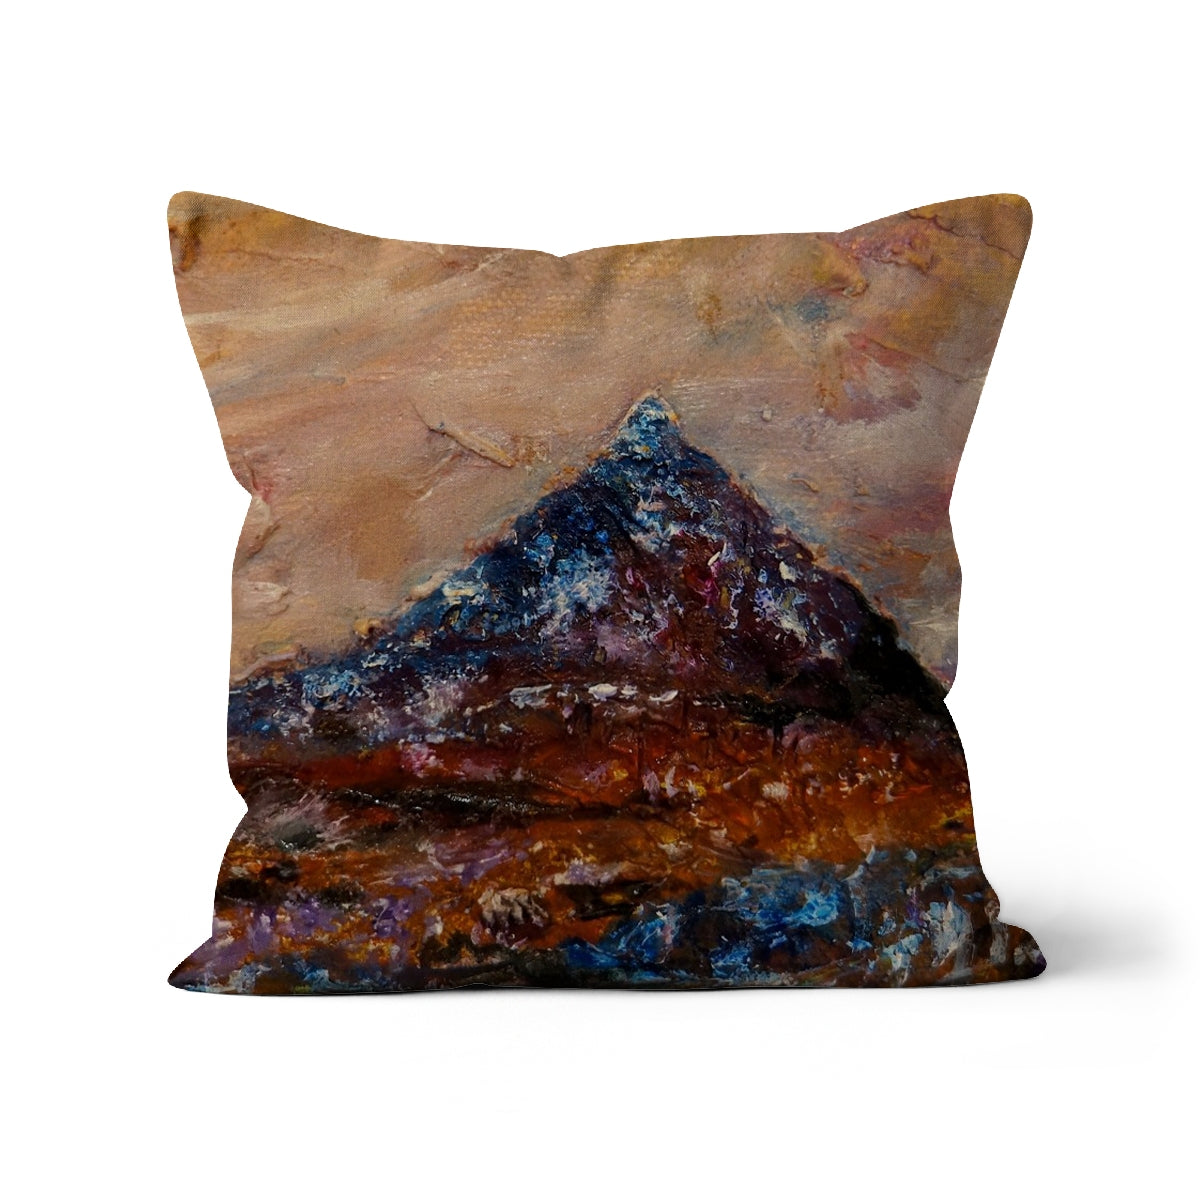 Buachaille Etive Mòr Art Gifts Cushion-Cushions-Glencoe Art Gallery-Canvas-18"x18"-Paintings, Prints, Homeware, Art Gifts From Scotland By Scottish Artist Kevin Hunter